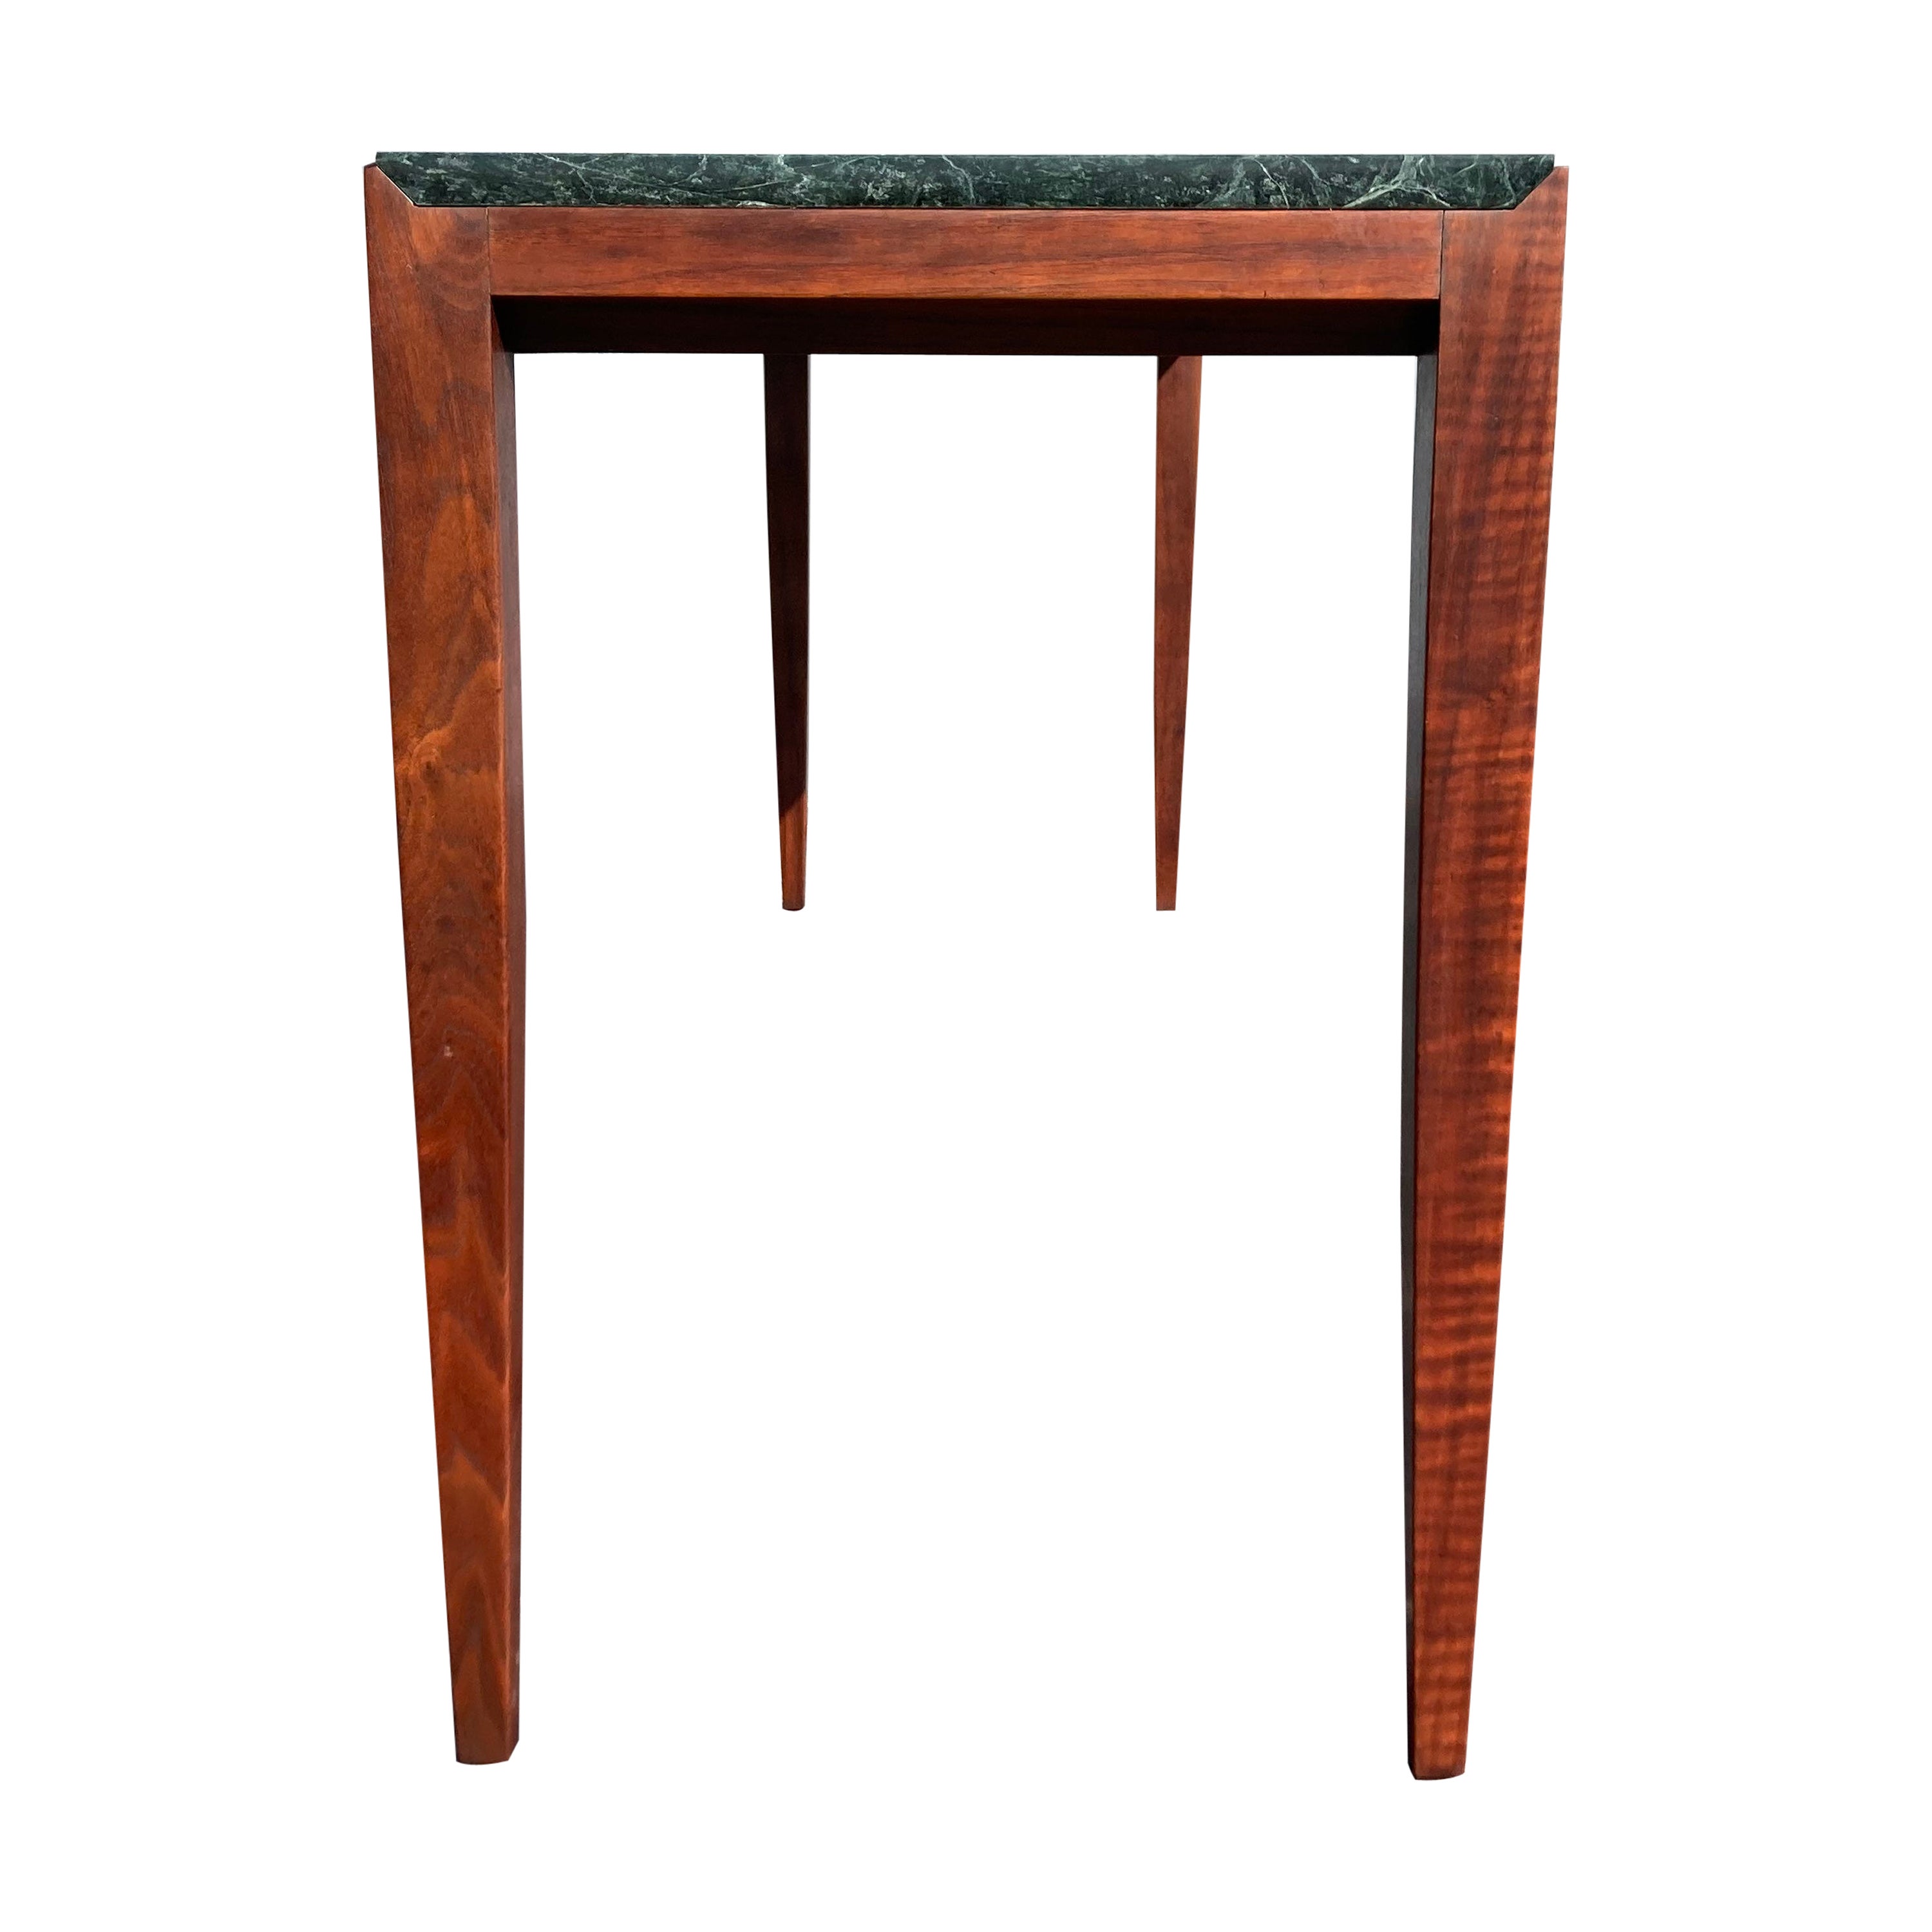 Beautiful Console Table Attributed to Gio Ponti, Walnut and Marble, 1950s For Sale